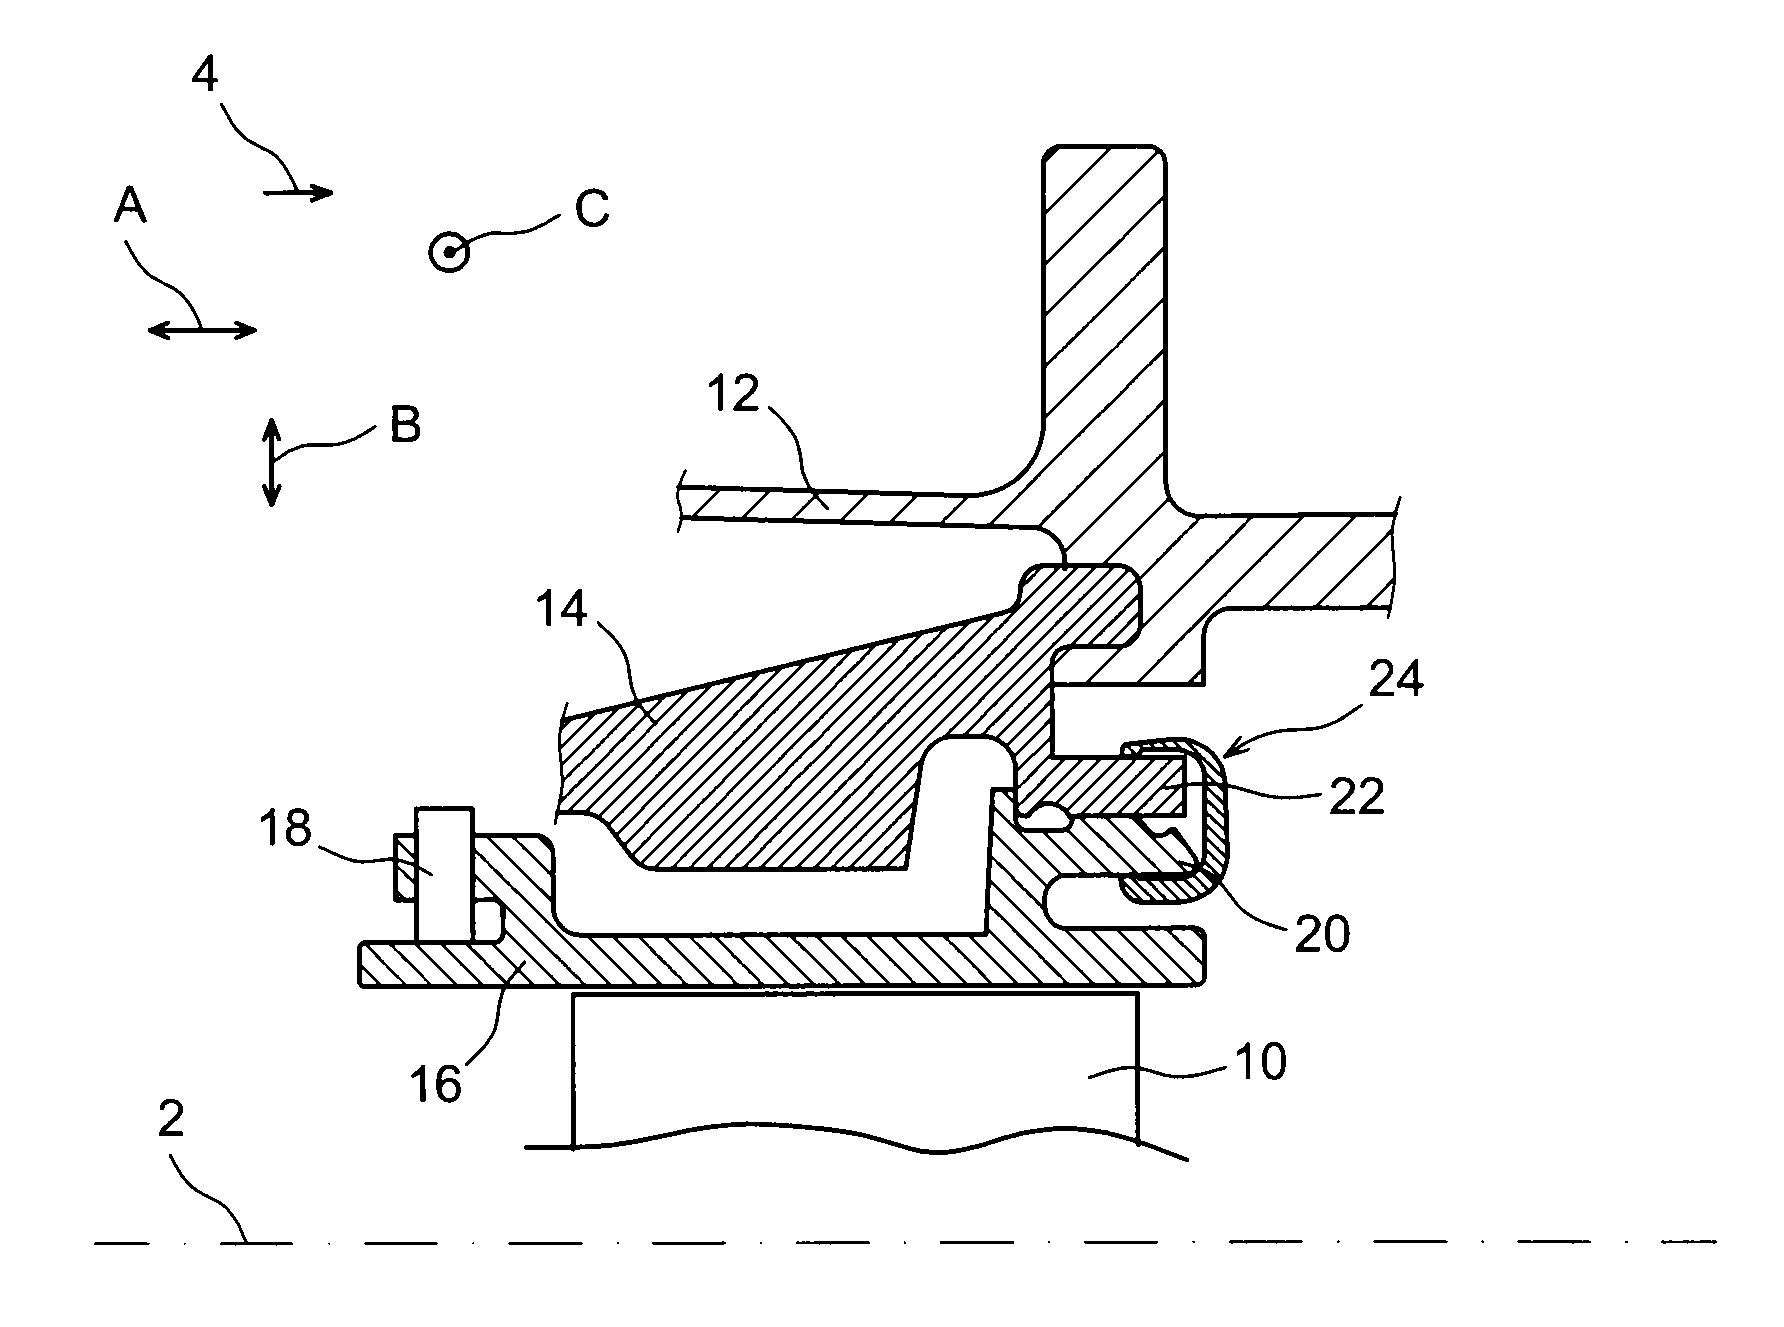 Asymmetrical member for locking ring sectors to a turbine engine casing